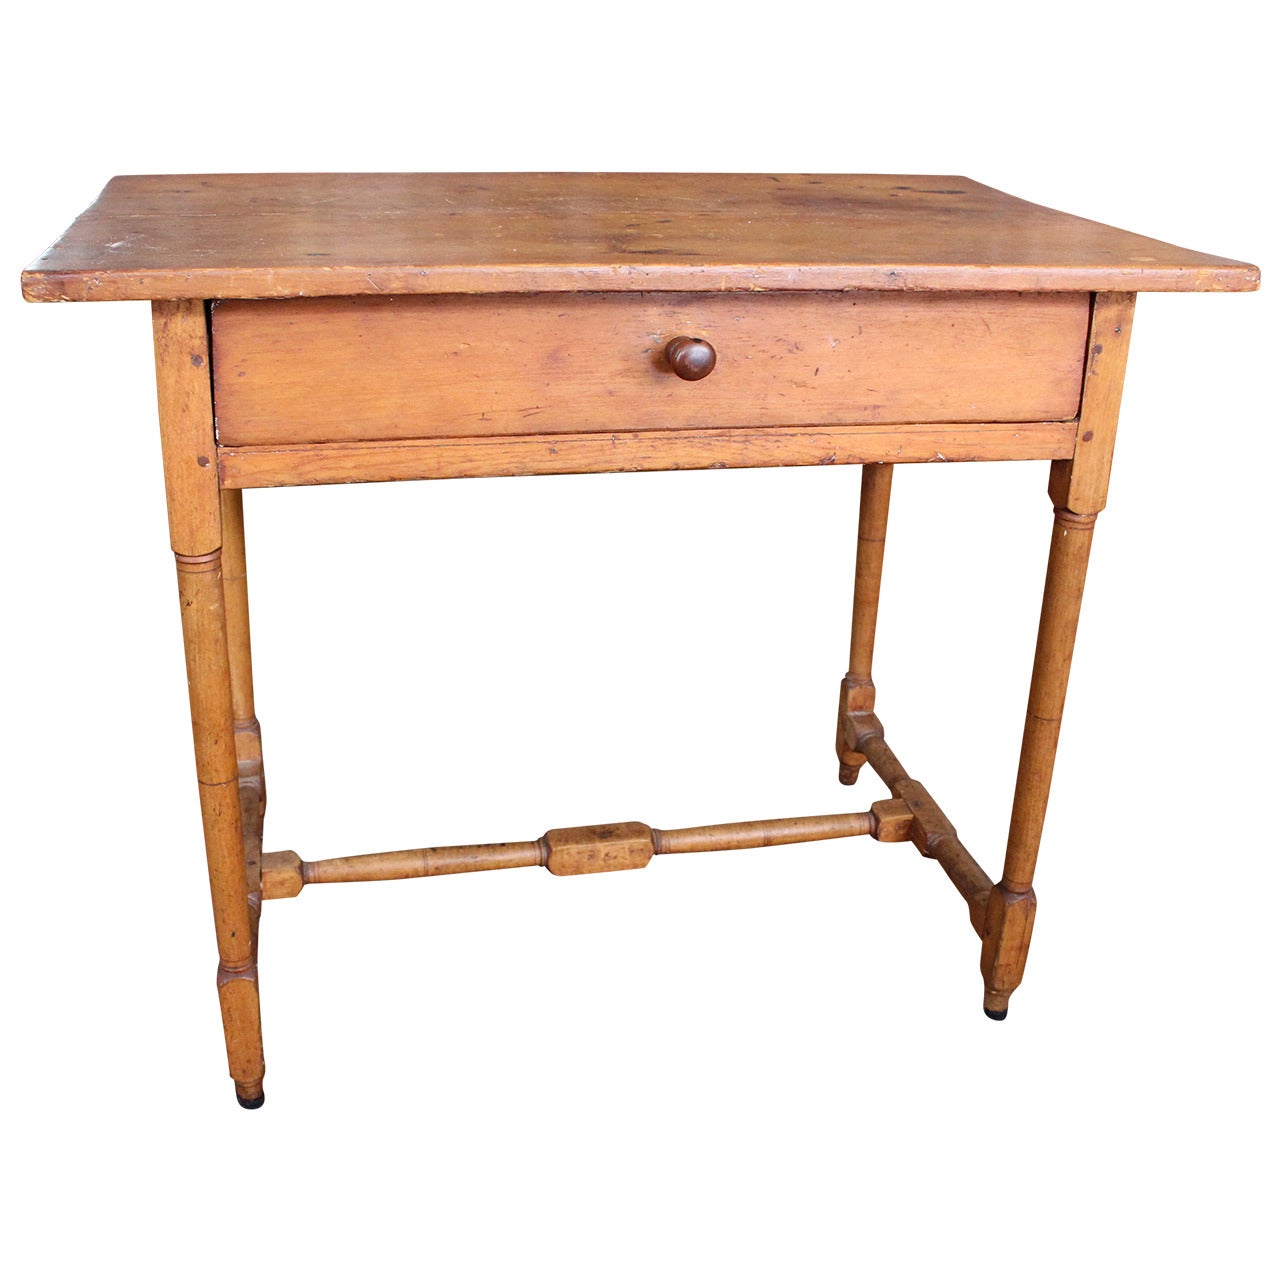 19th Century Pine Side Table